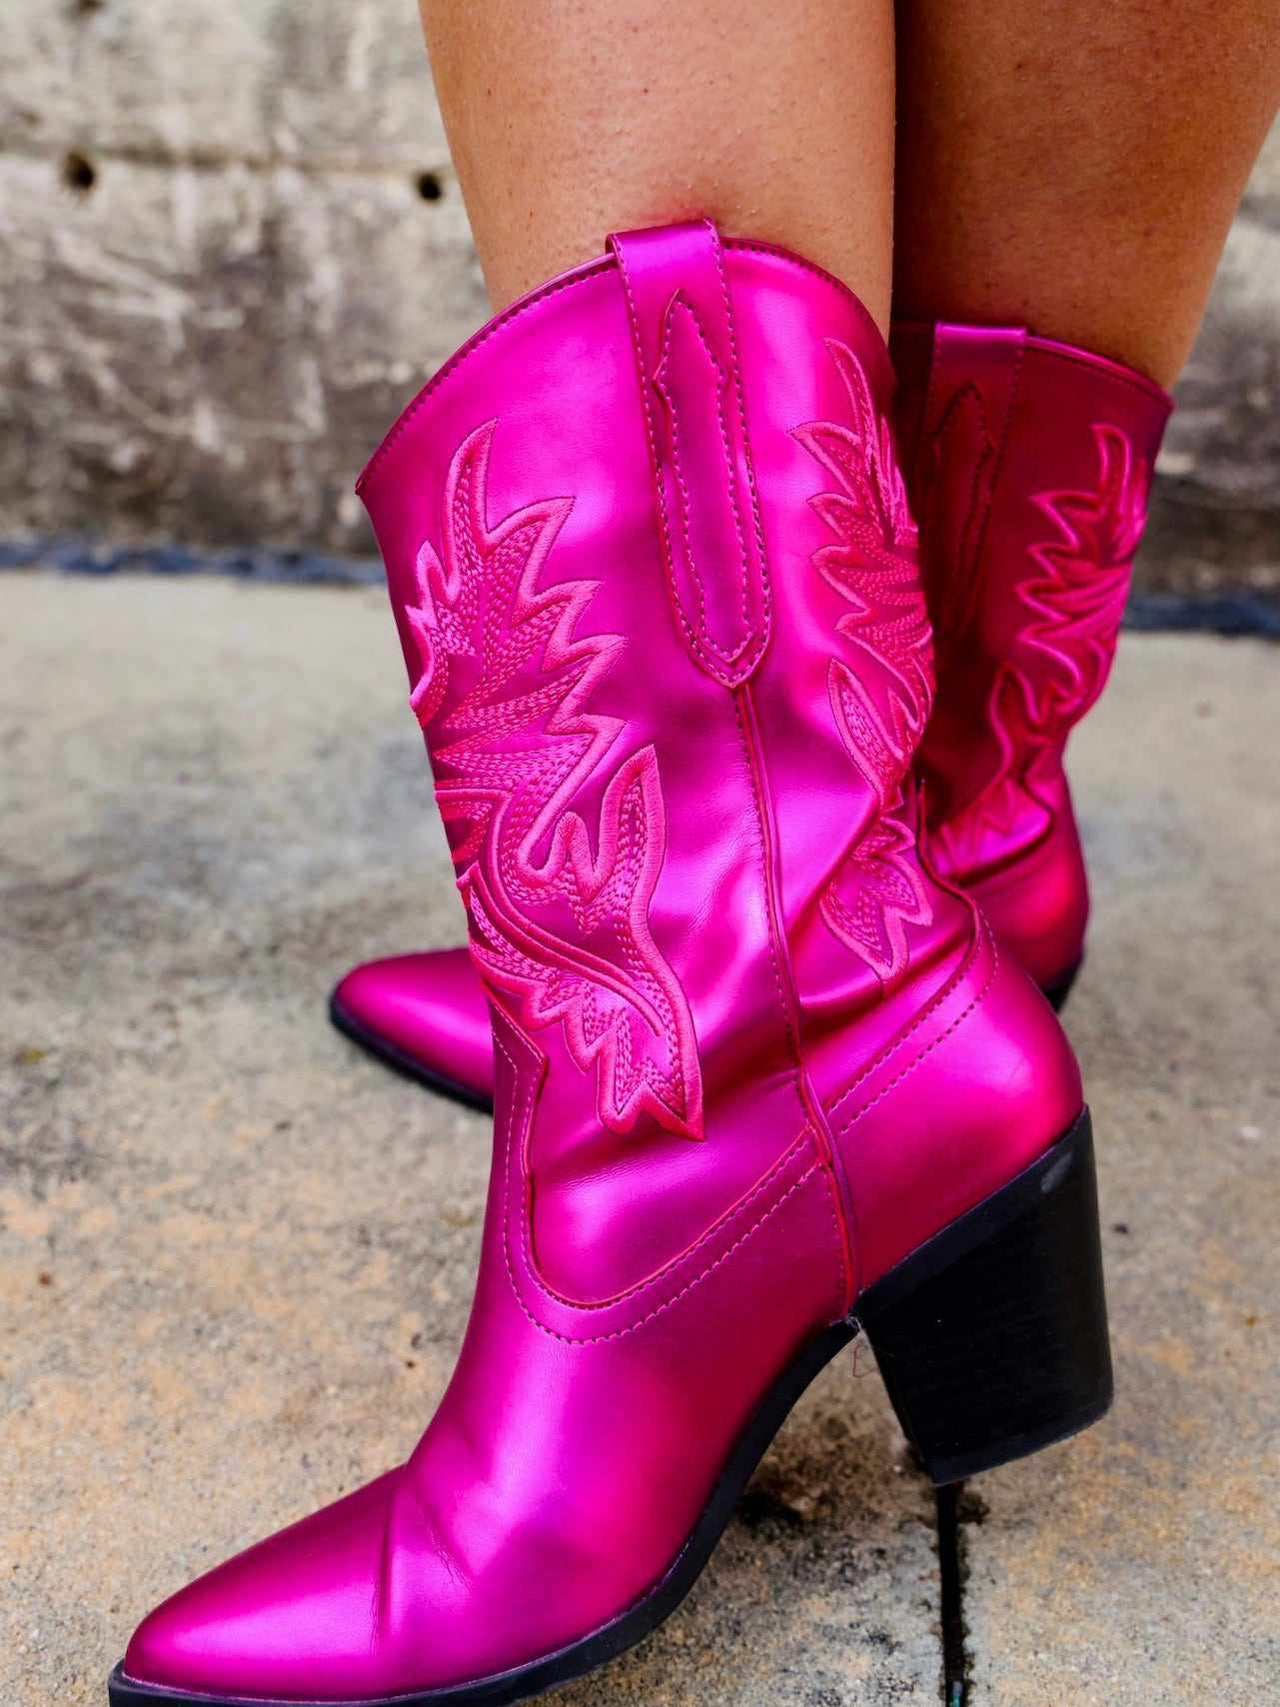 Space Cowgirl Booties - Pink Metallic